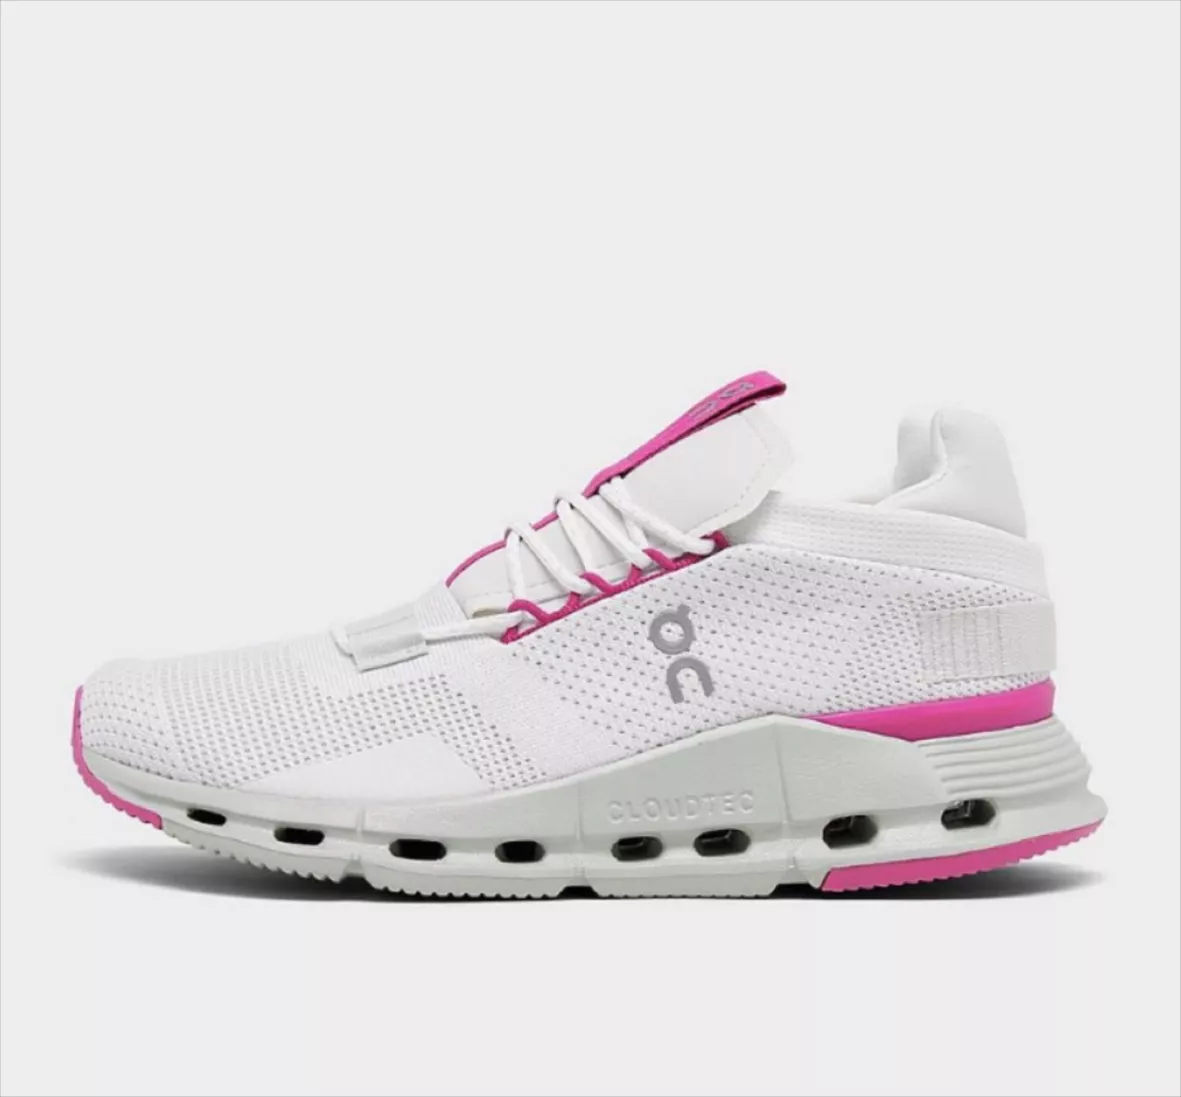 the perfect shade of pink! These are on my LTK under “Nike pink sweatp